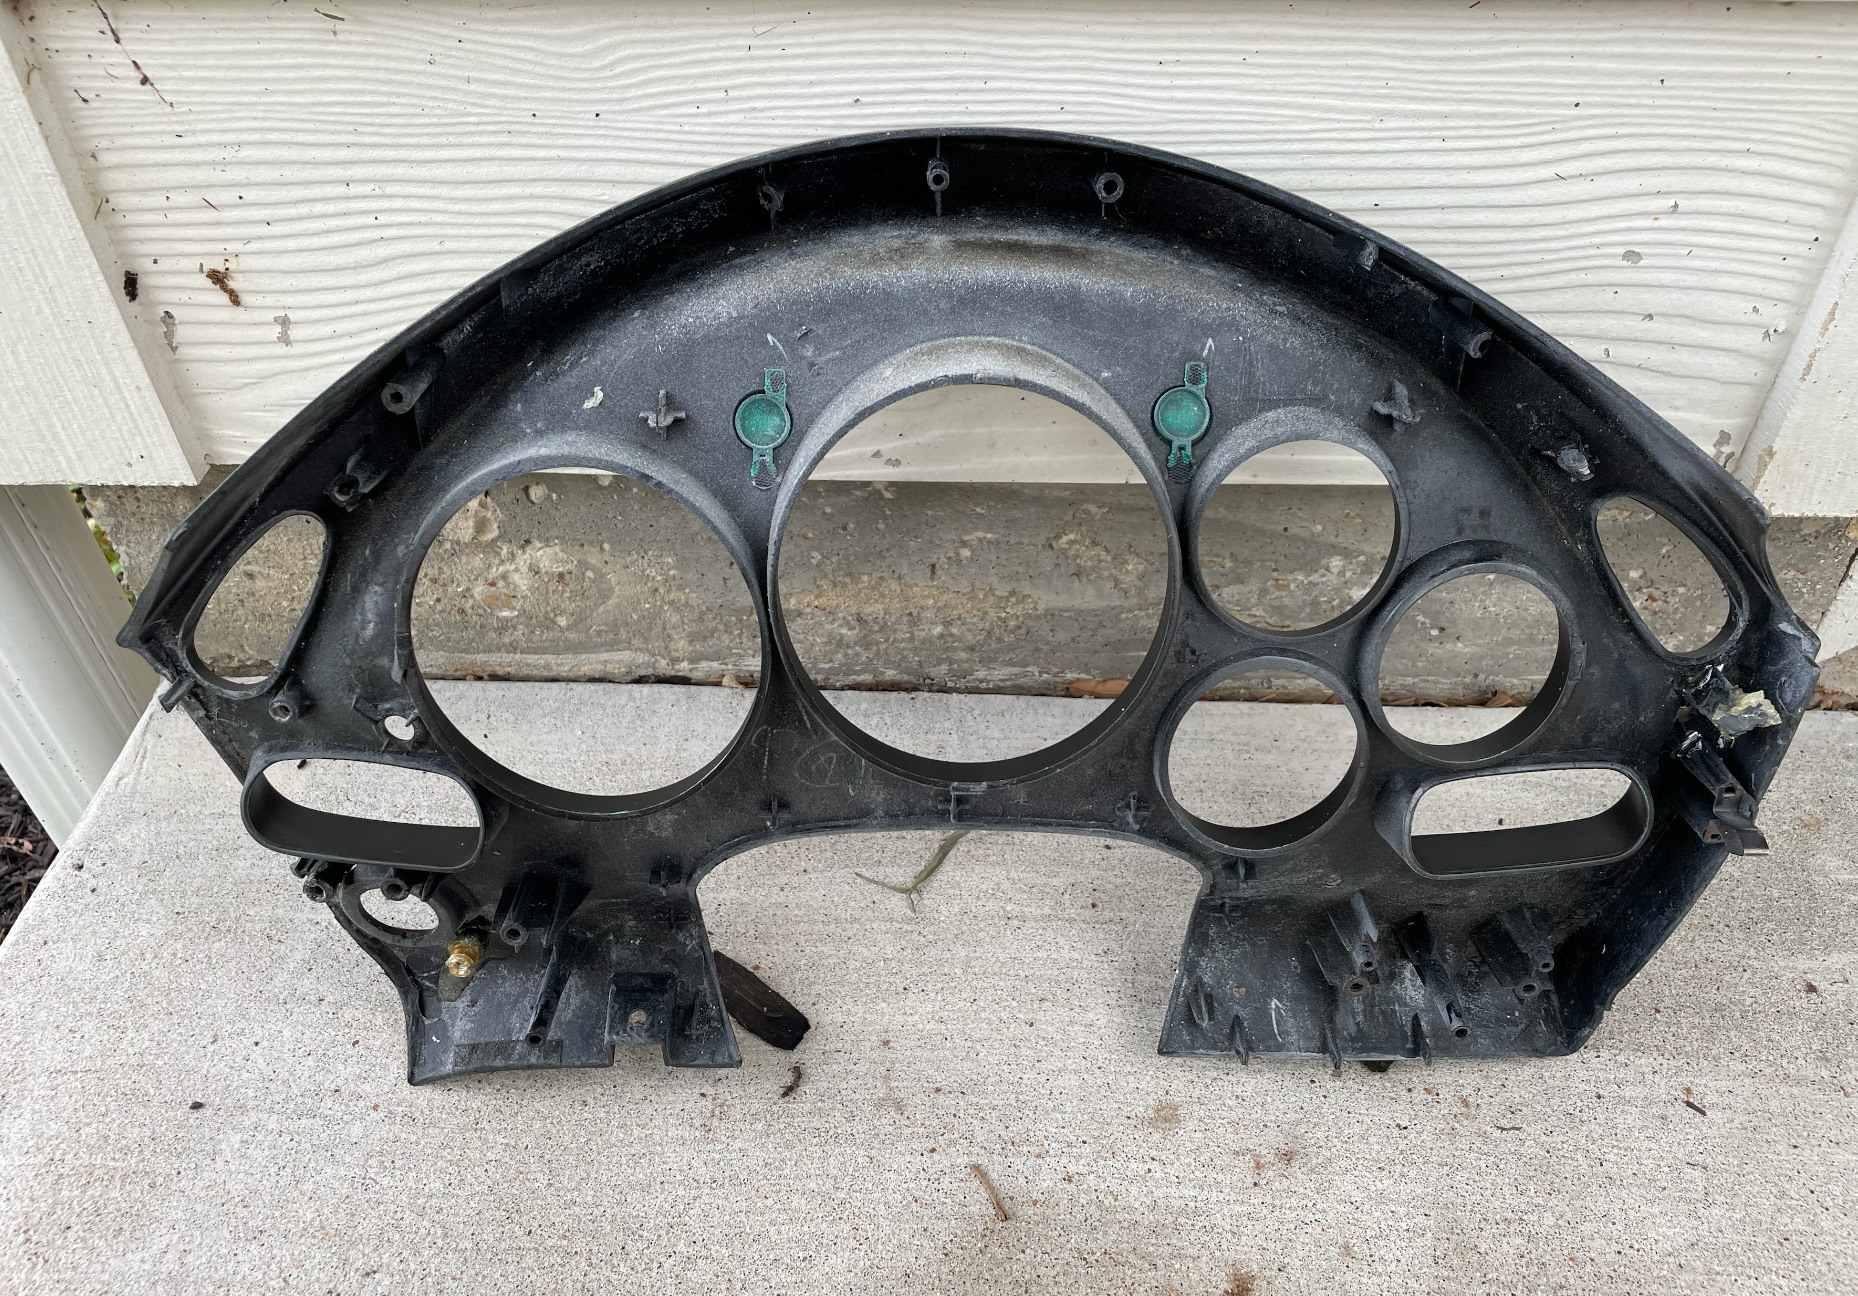 Interior/Upholstery - 1993 FD RX-7 Gauge Cover - Used - 0  All Models - Fort Worth, TX 76111, United States